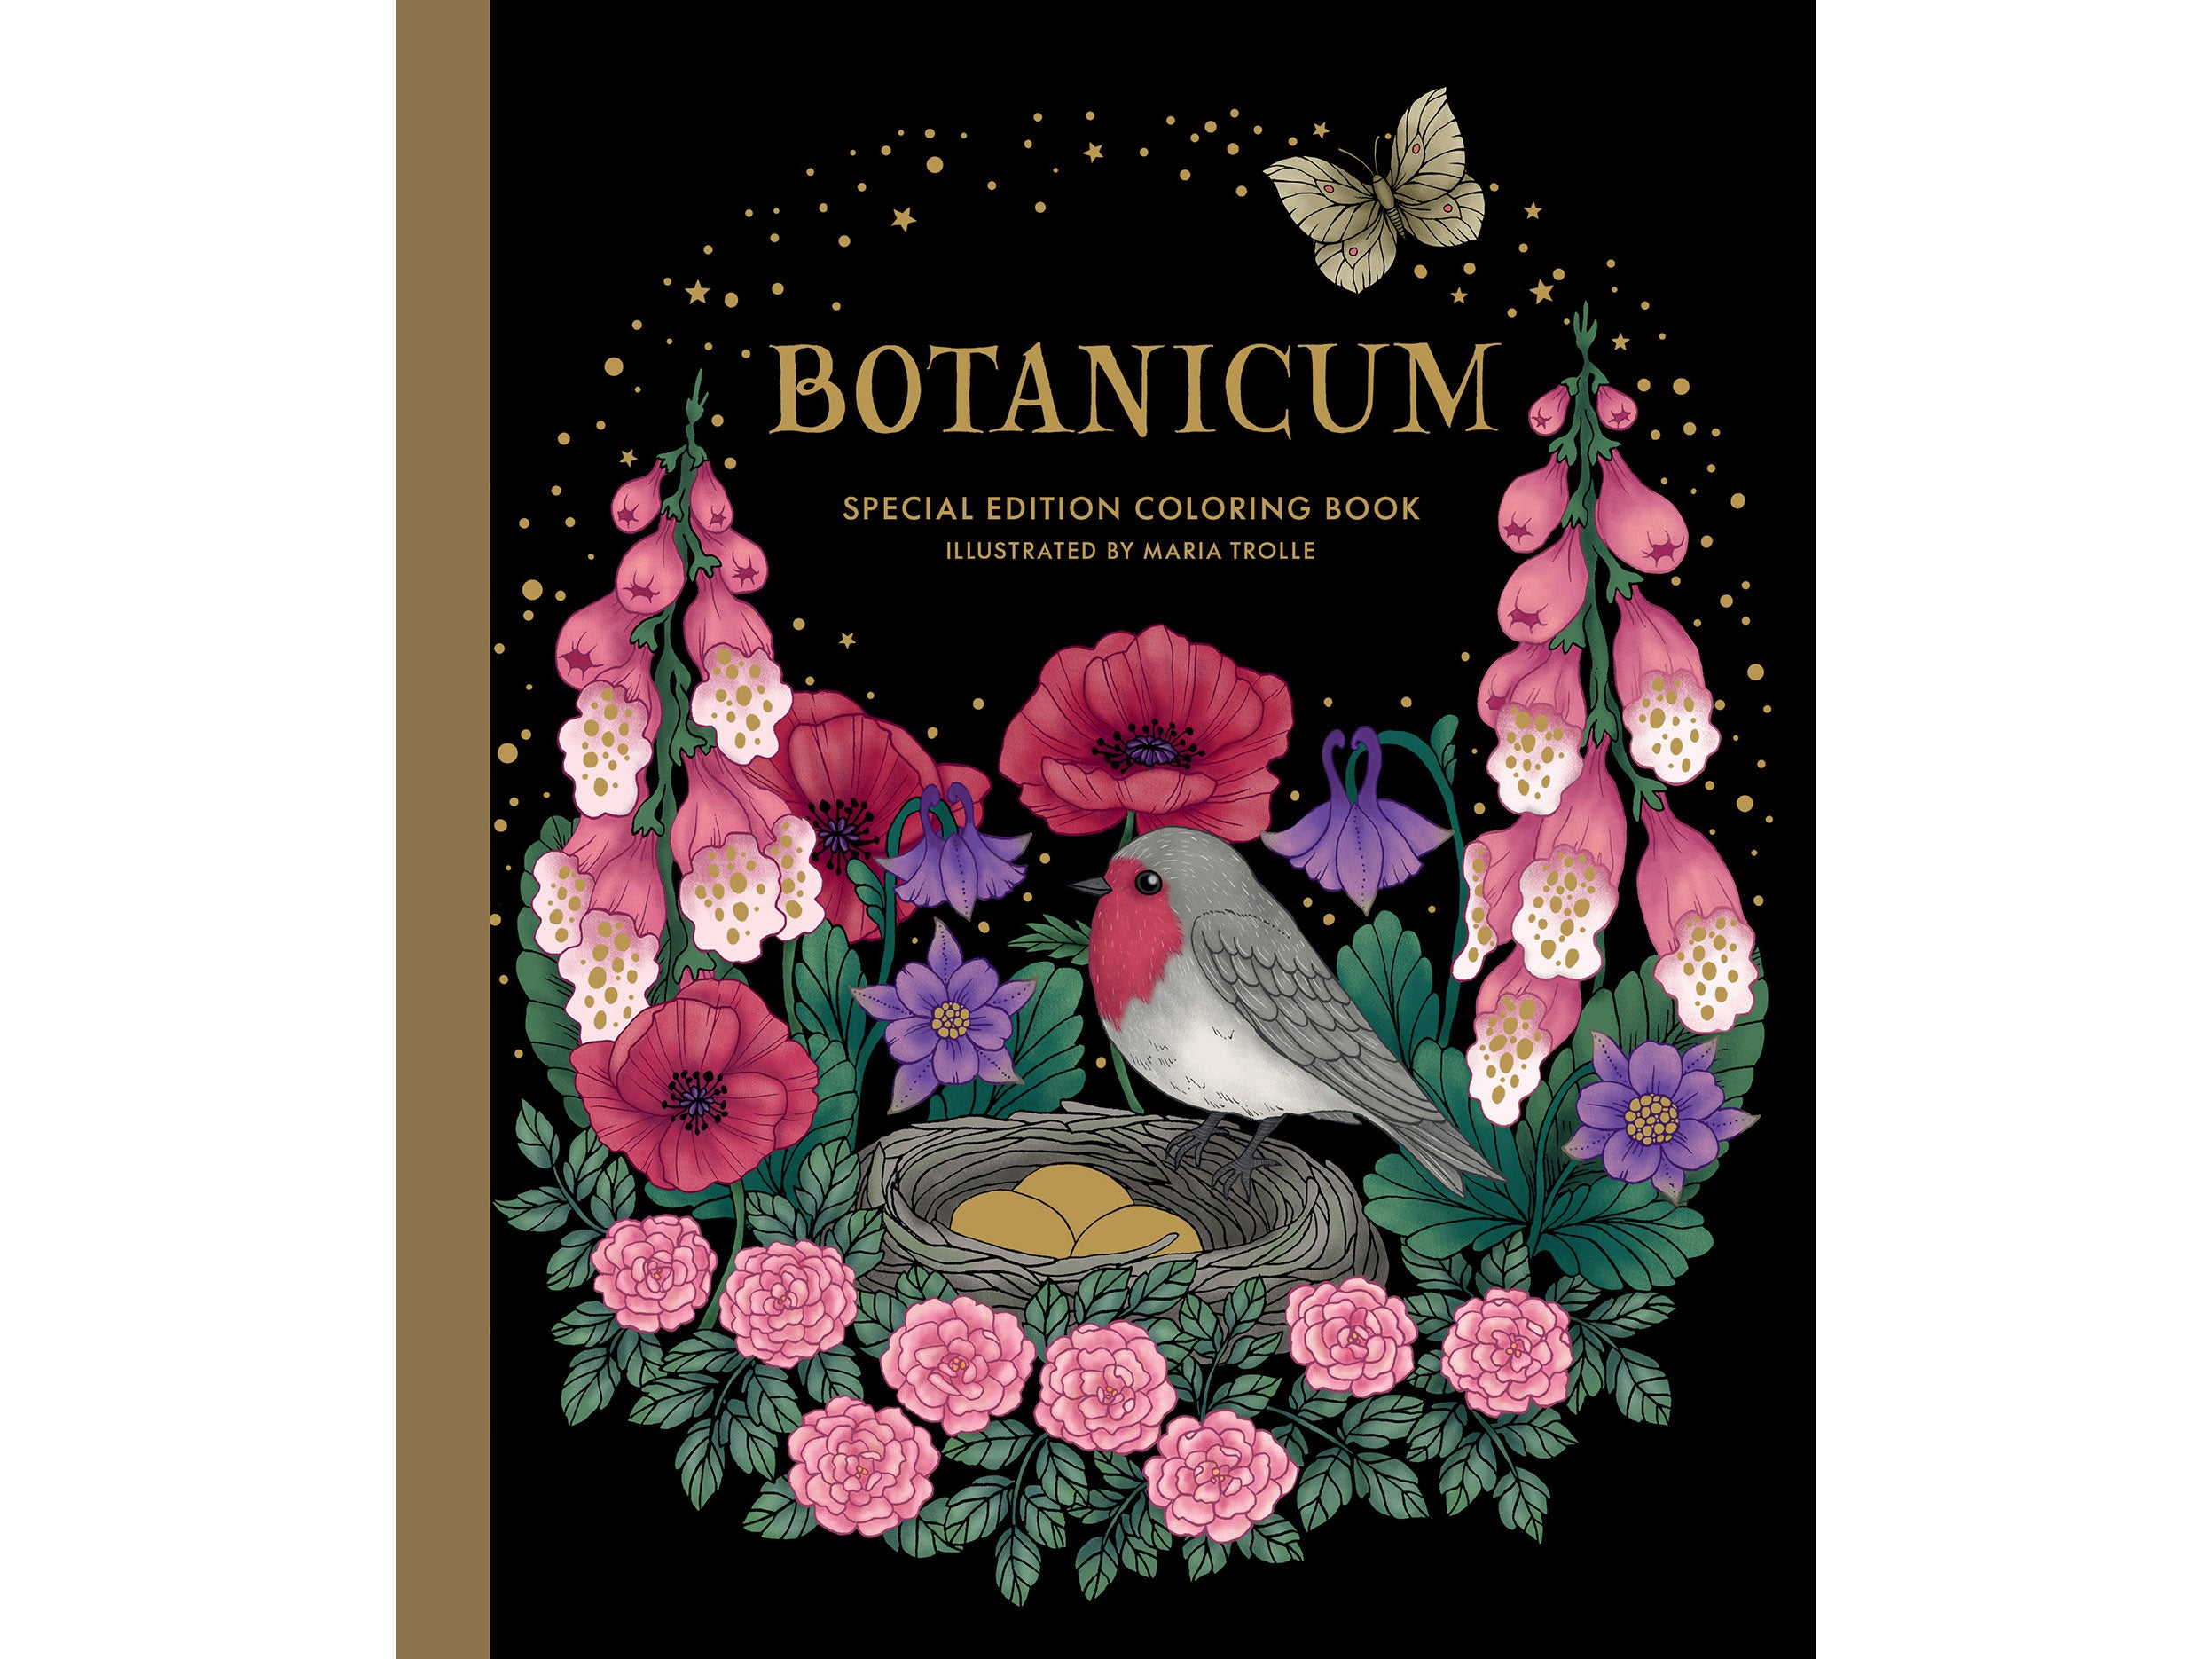 Botanicum Special Edition Coloring Book illustrated by Maria Trolle.jpg